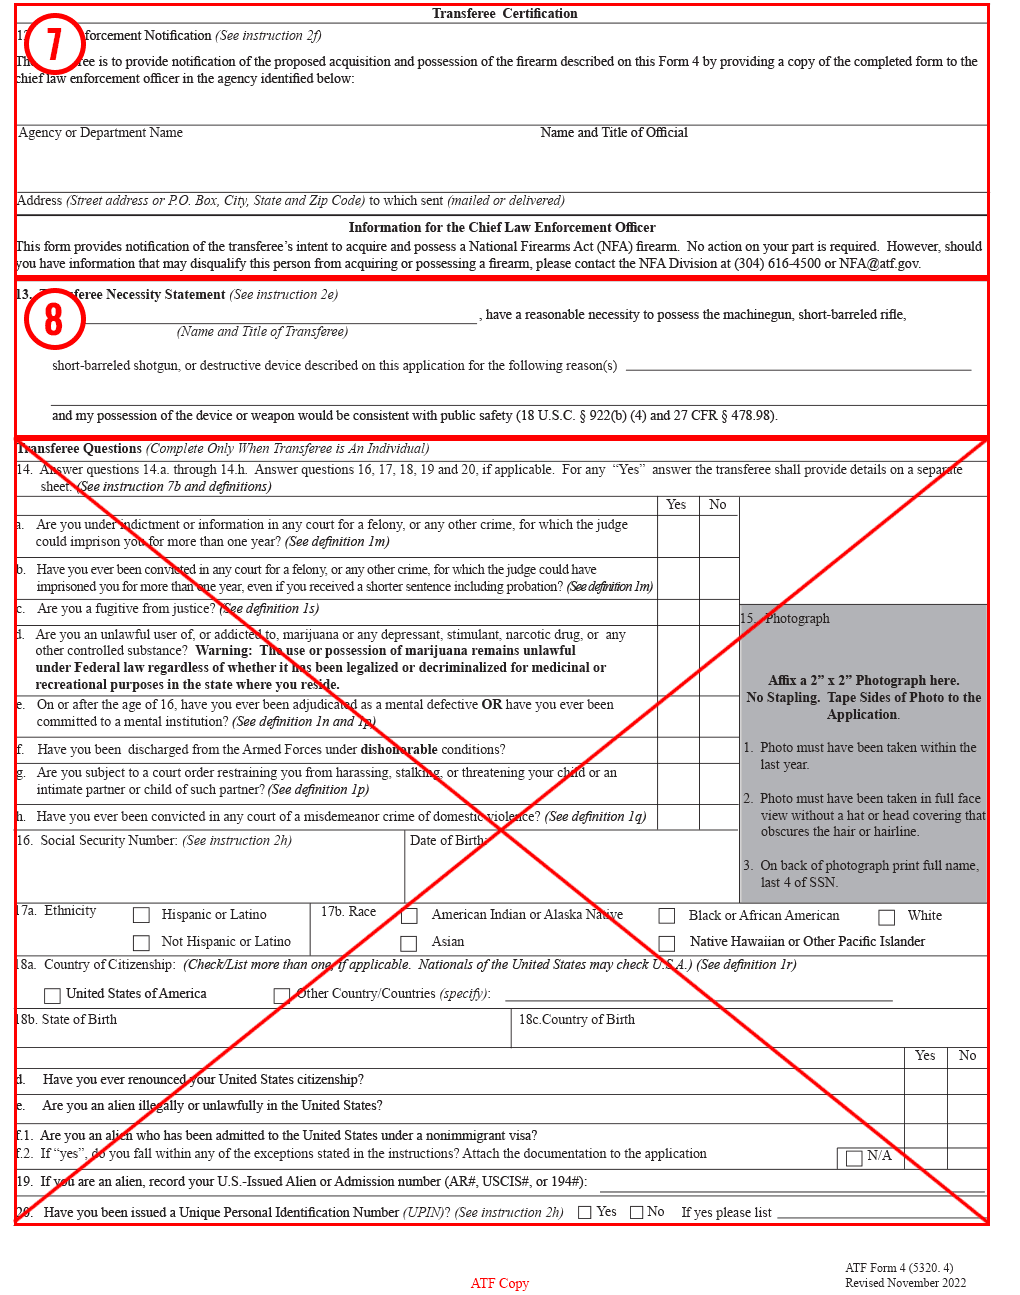 How To Fill Out ATF Form 4 Using A Gun Trust